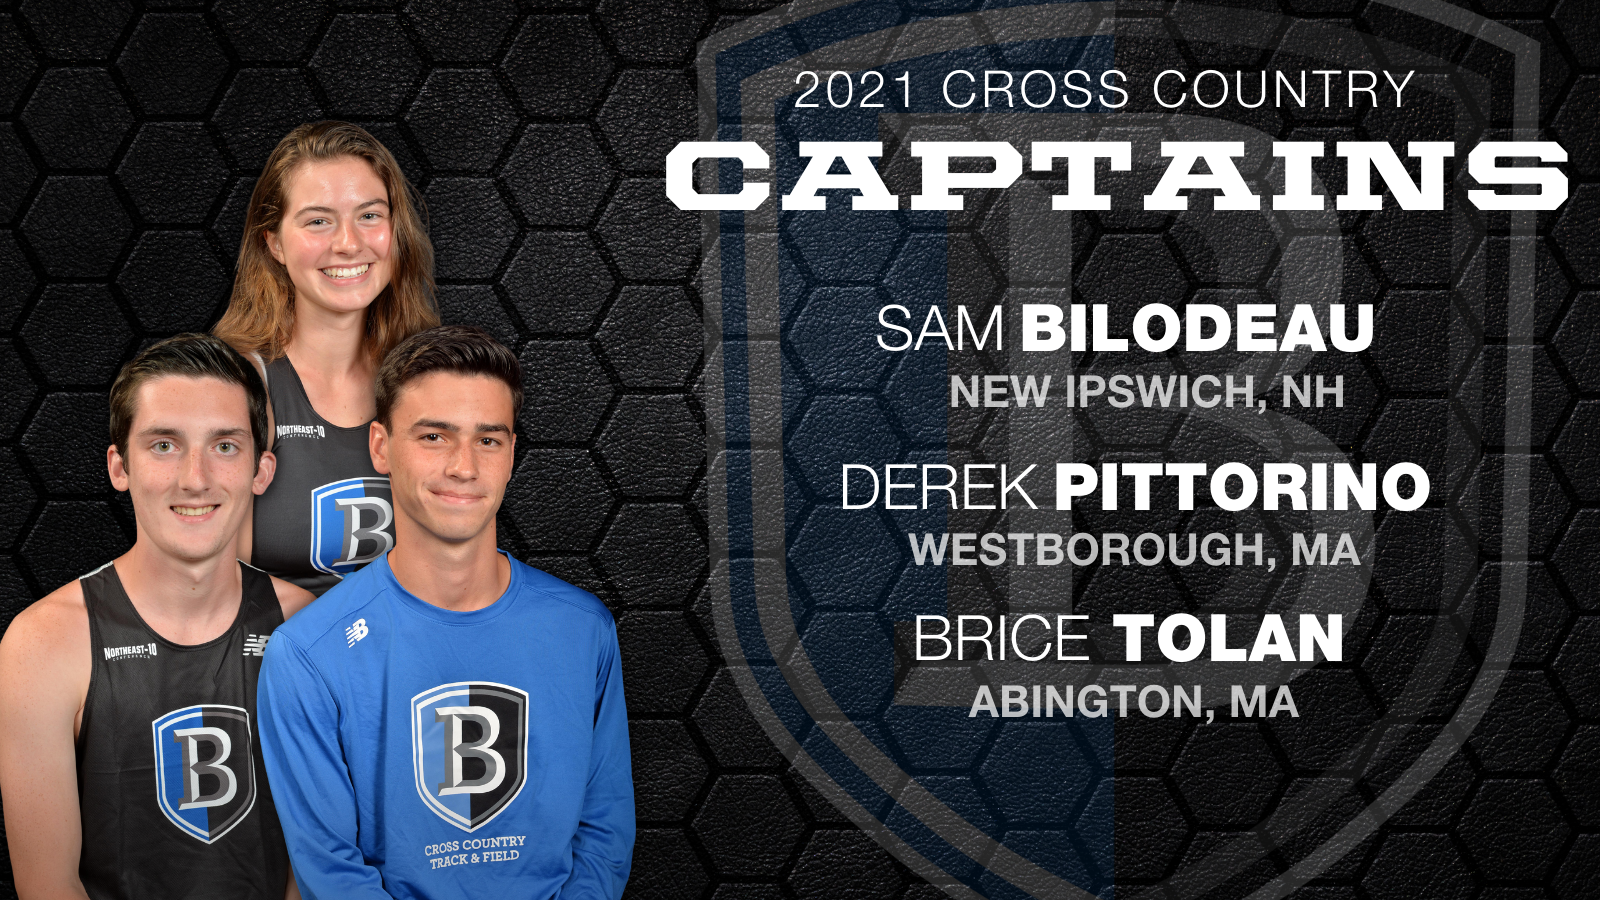 Graphic featuring the 2021 Bentley cross country captains